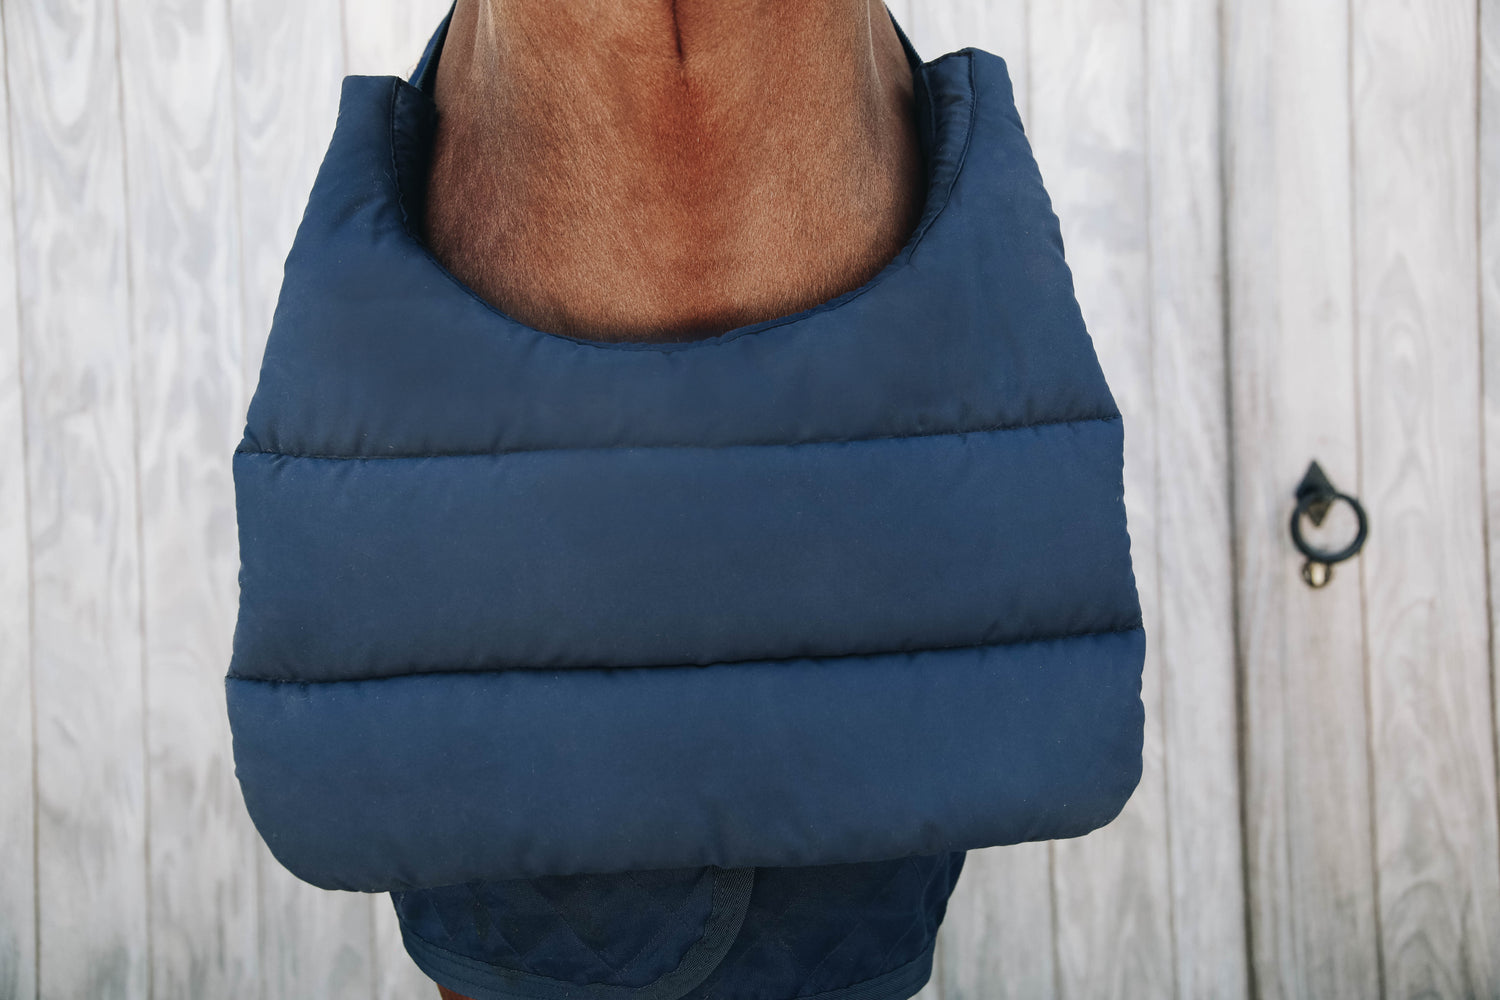 The Kentucky bib has been designed to protect your your horse from those annoying rubs caused by rugs. The Kentucky summer bib  is the ideal pad to protect your horse’s chest.